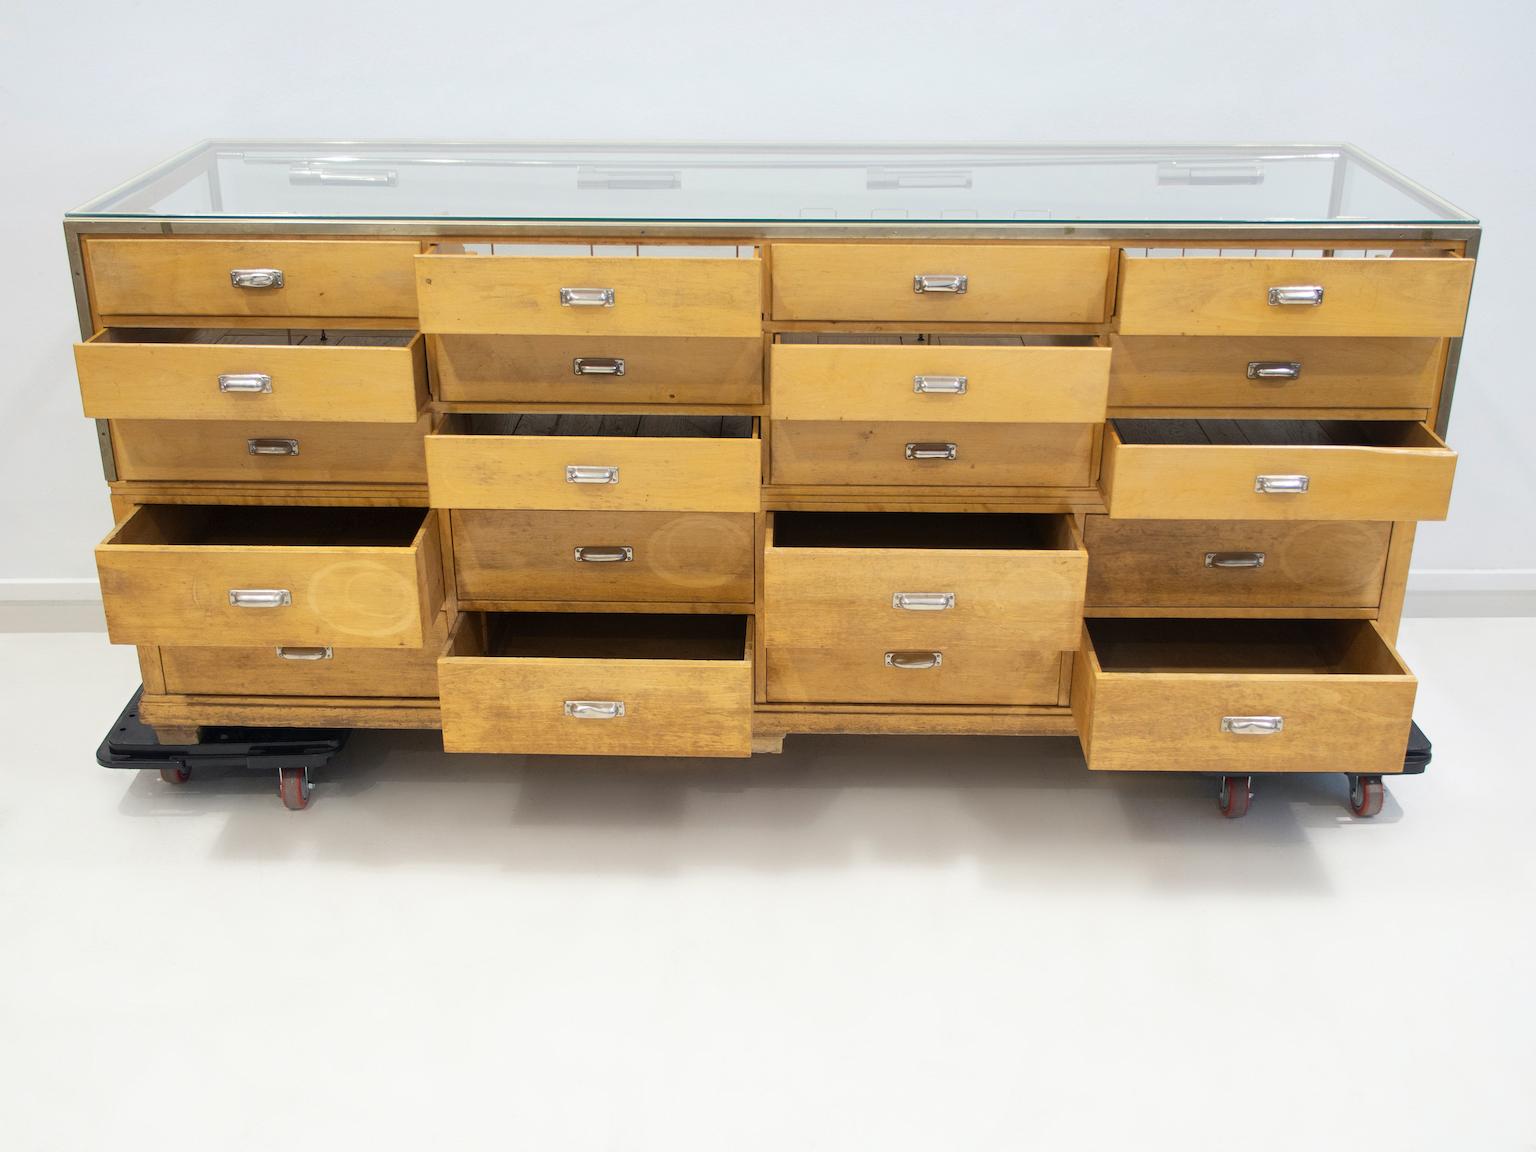 Shop Counter of Birch and Oak Wood with Twenty Drawers, 1940's For Sale 11